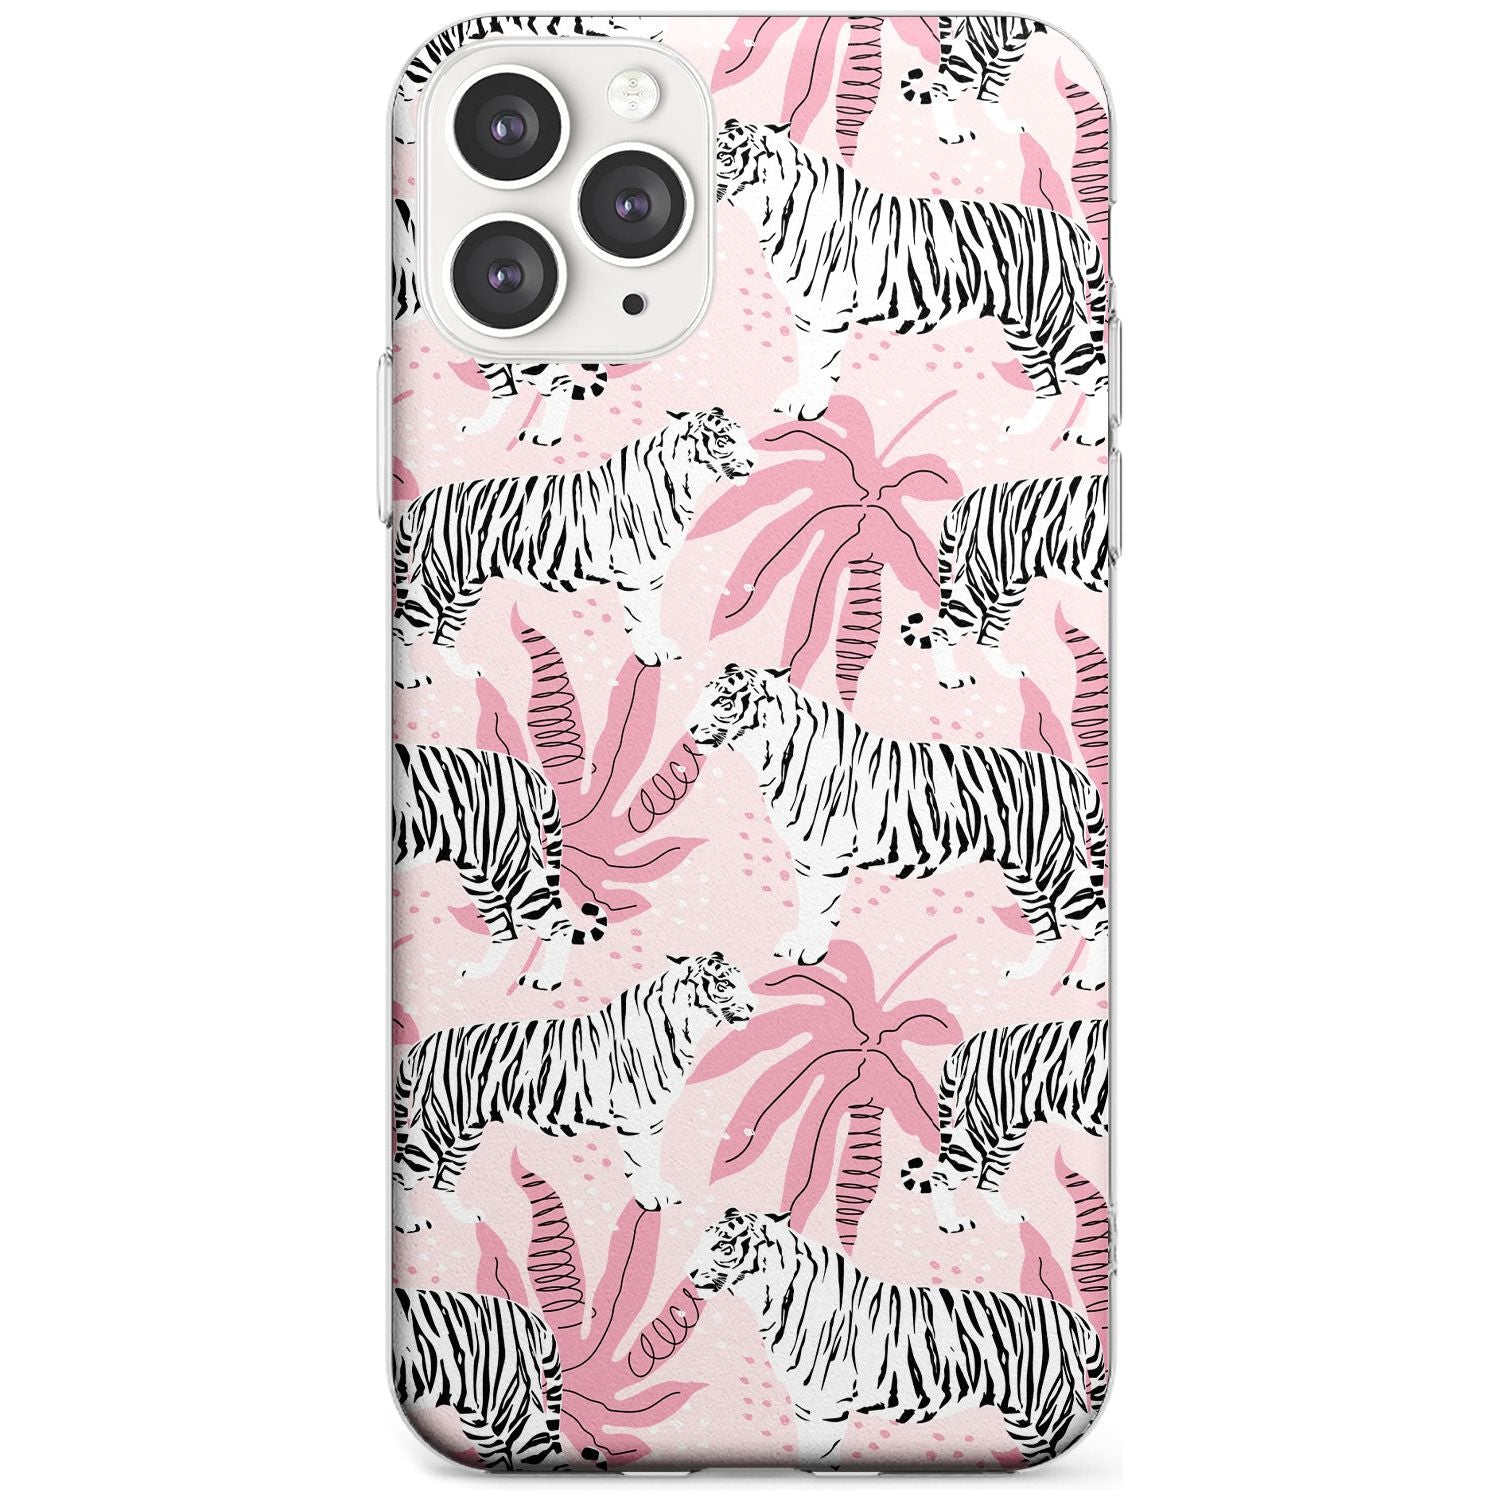 White Tigers on Pink Pattern Slim TPU Phone Case for iPhone 11 Pro Max